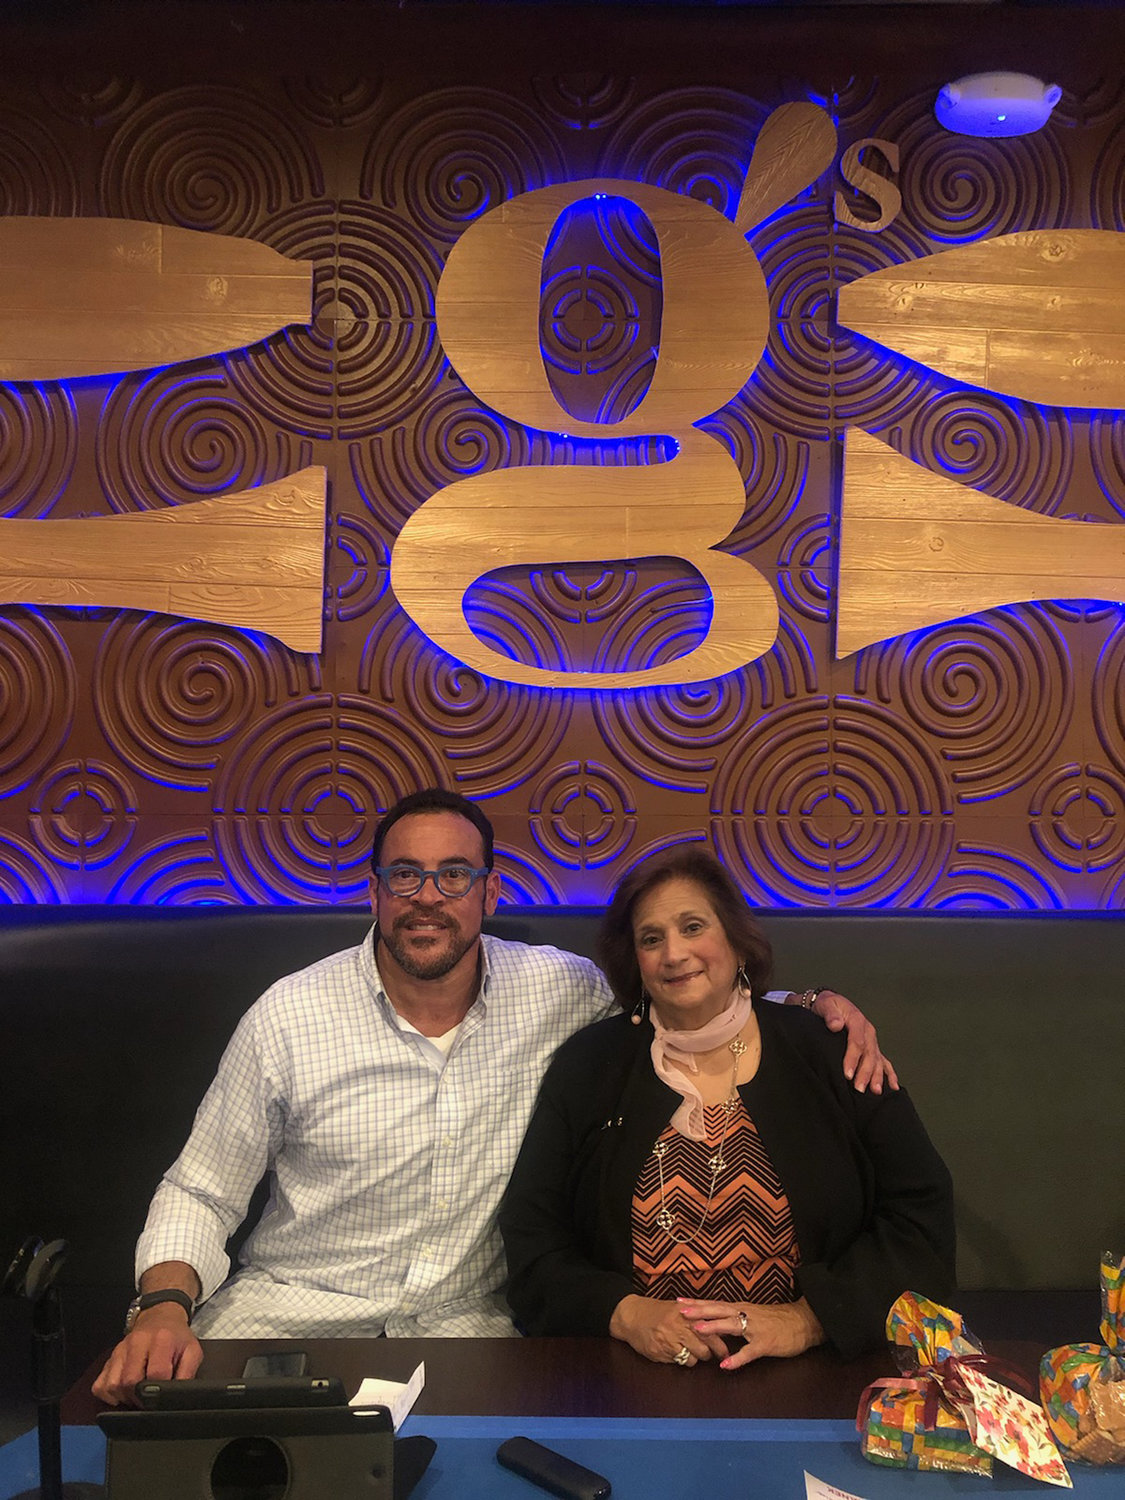 Long Island Breakfast Club members Gregg Cajuste and Valentina Janek met at the club’s new home, G’s Dance and Night Club, in West Hempstead, on June 4.